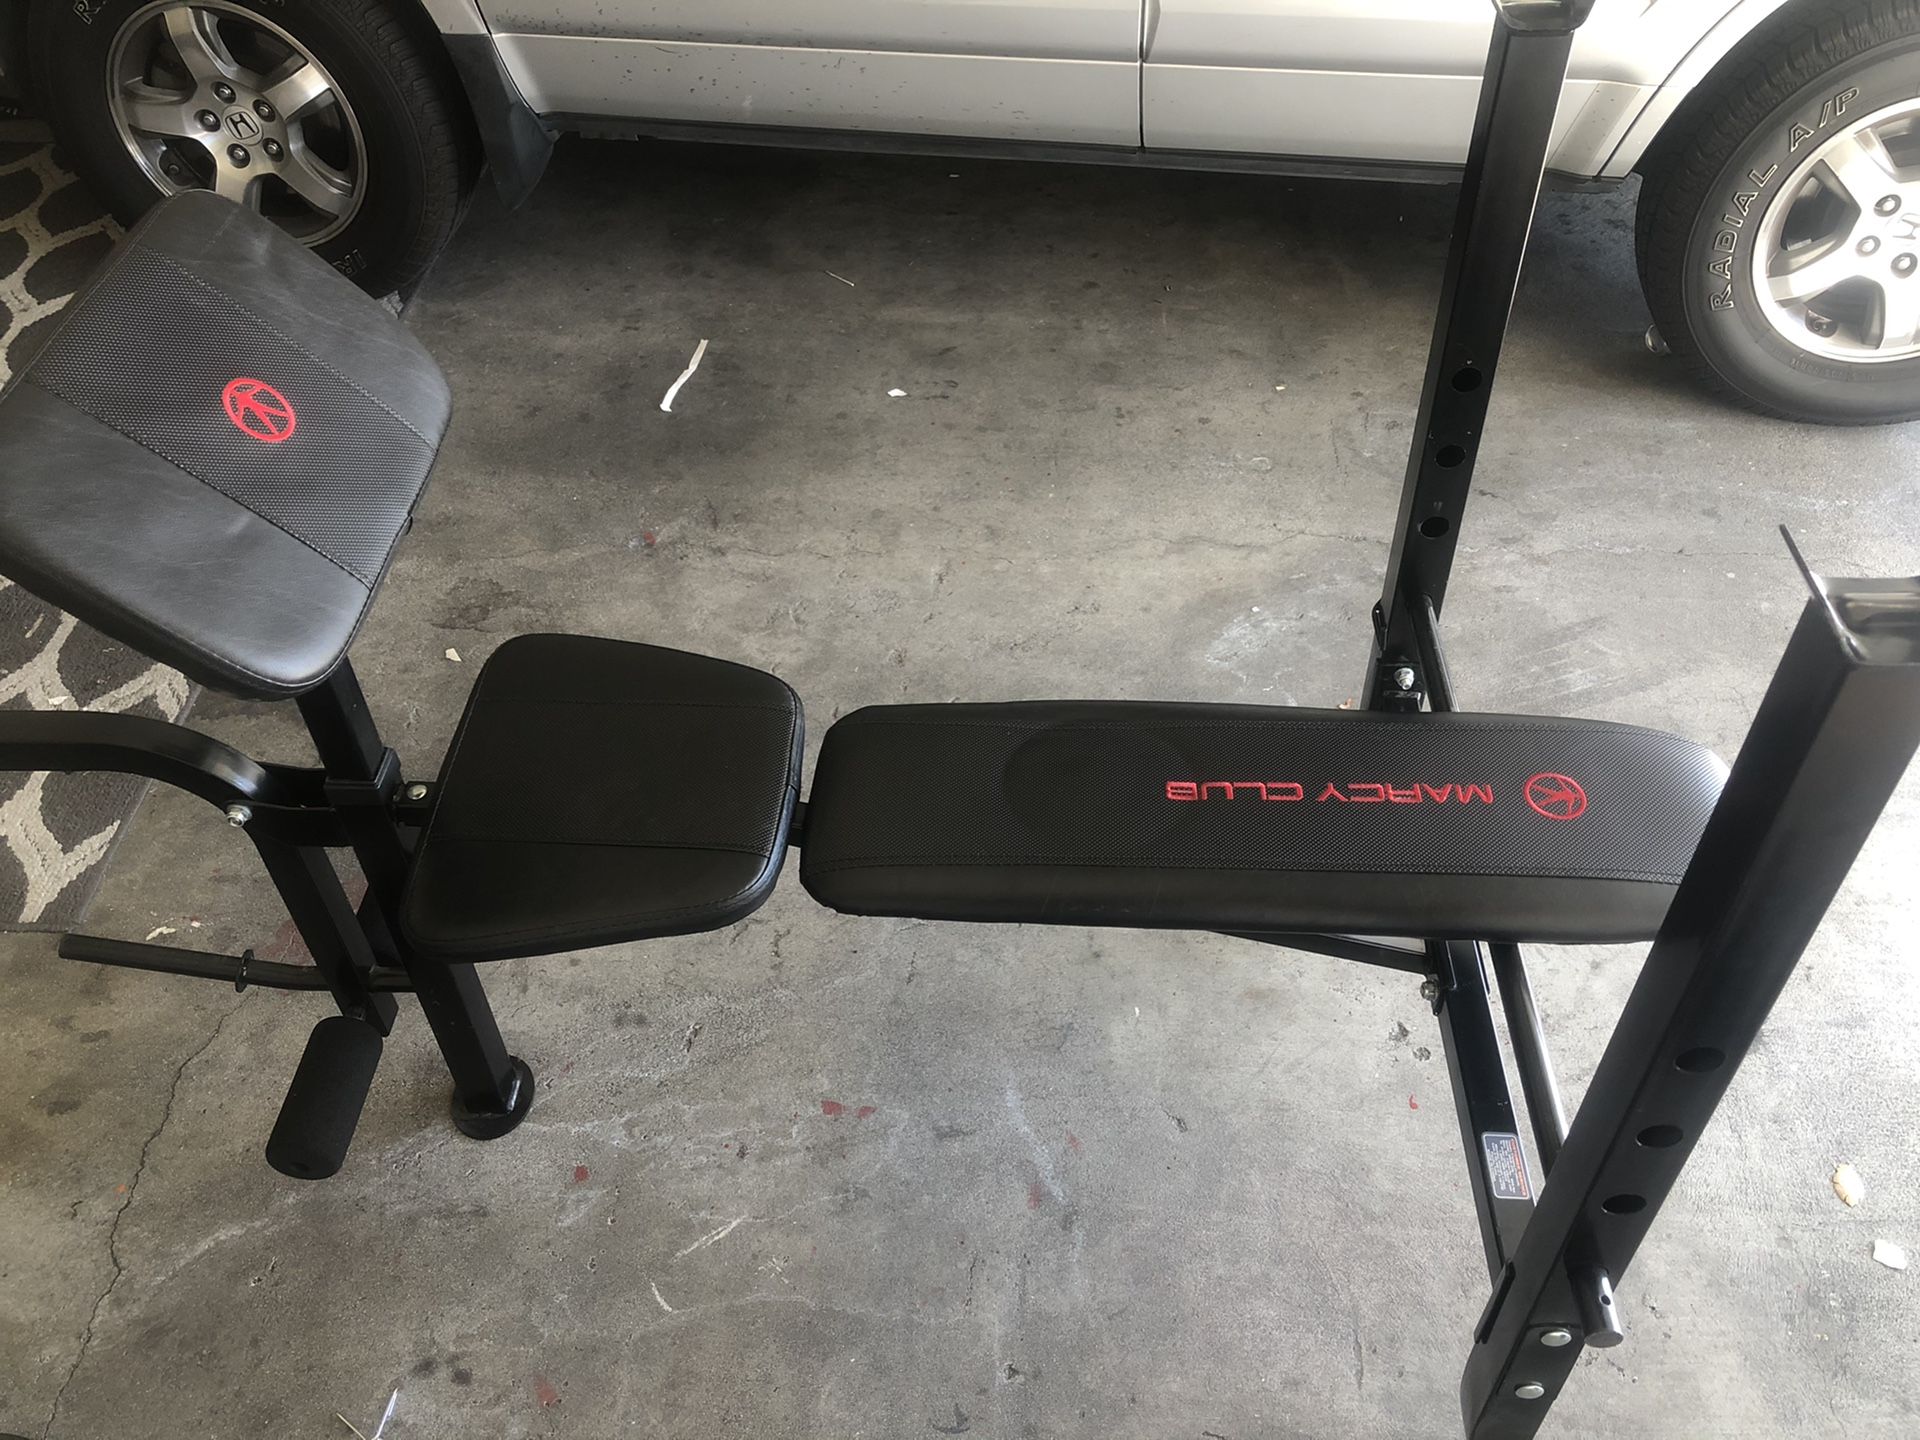 Marcy Club Weight Bench w/ 140 lbs weight set